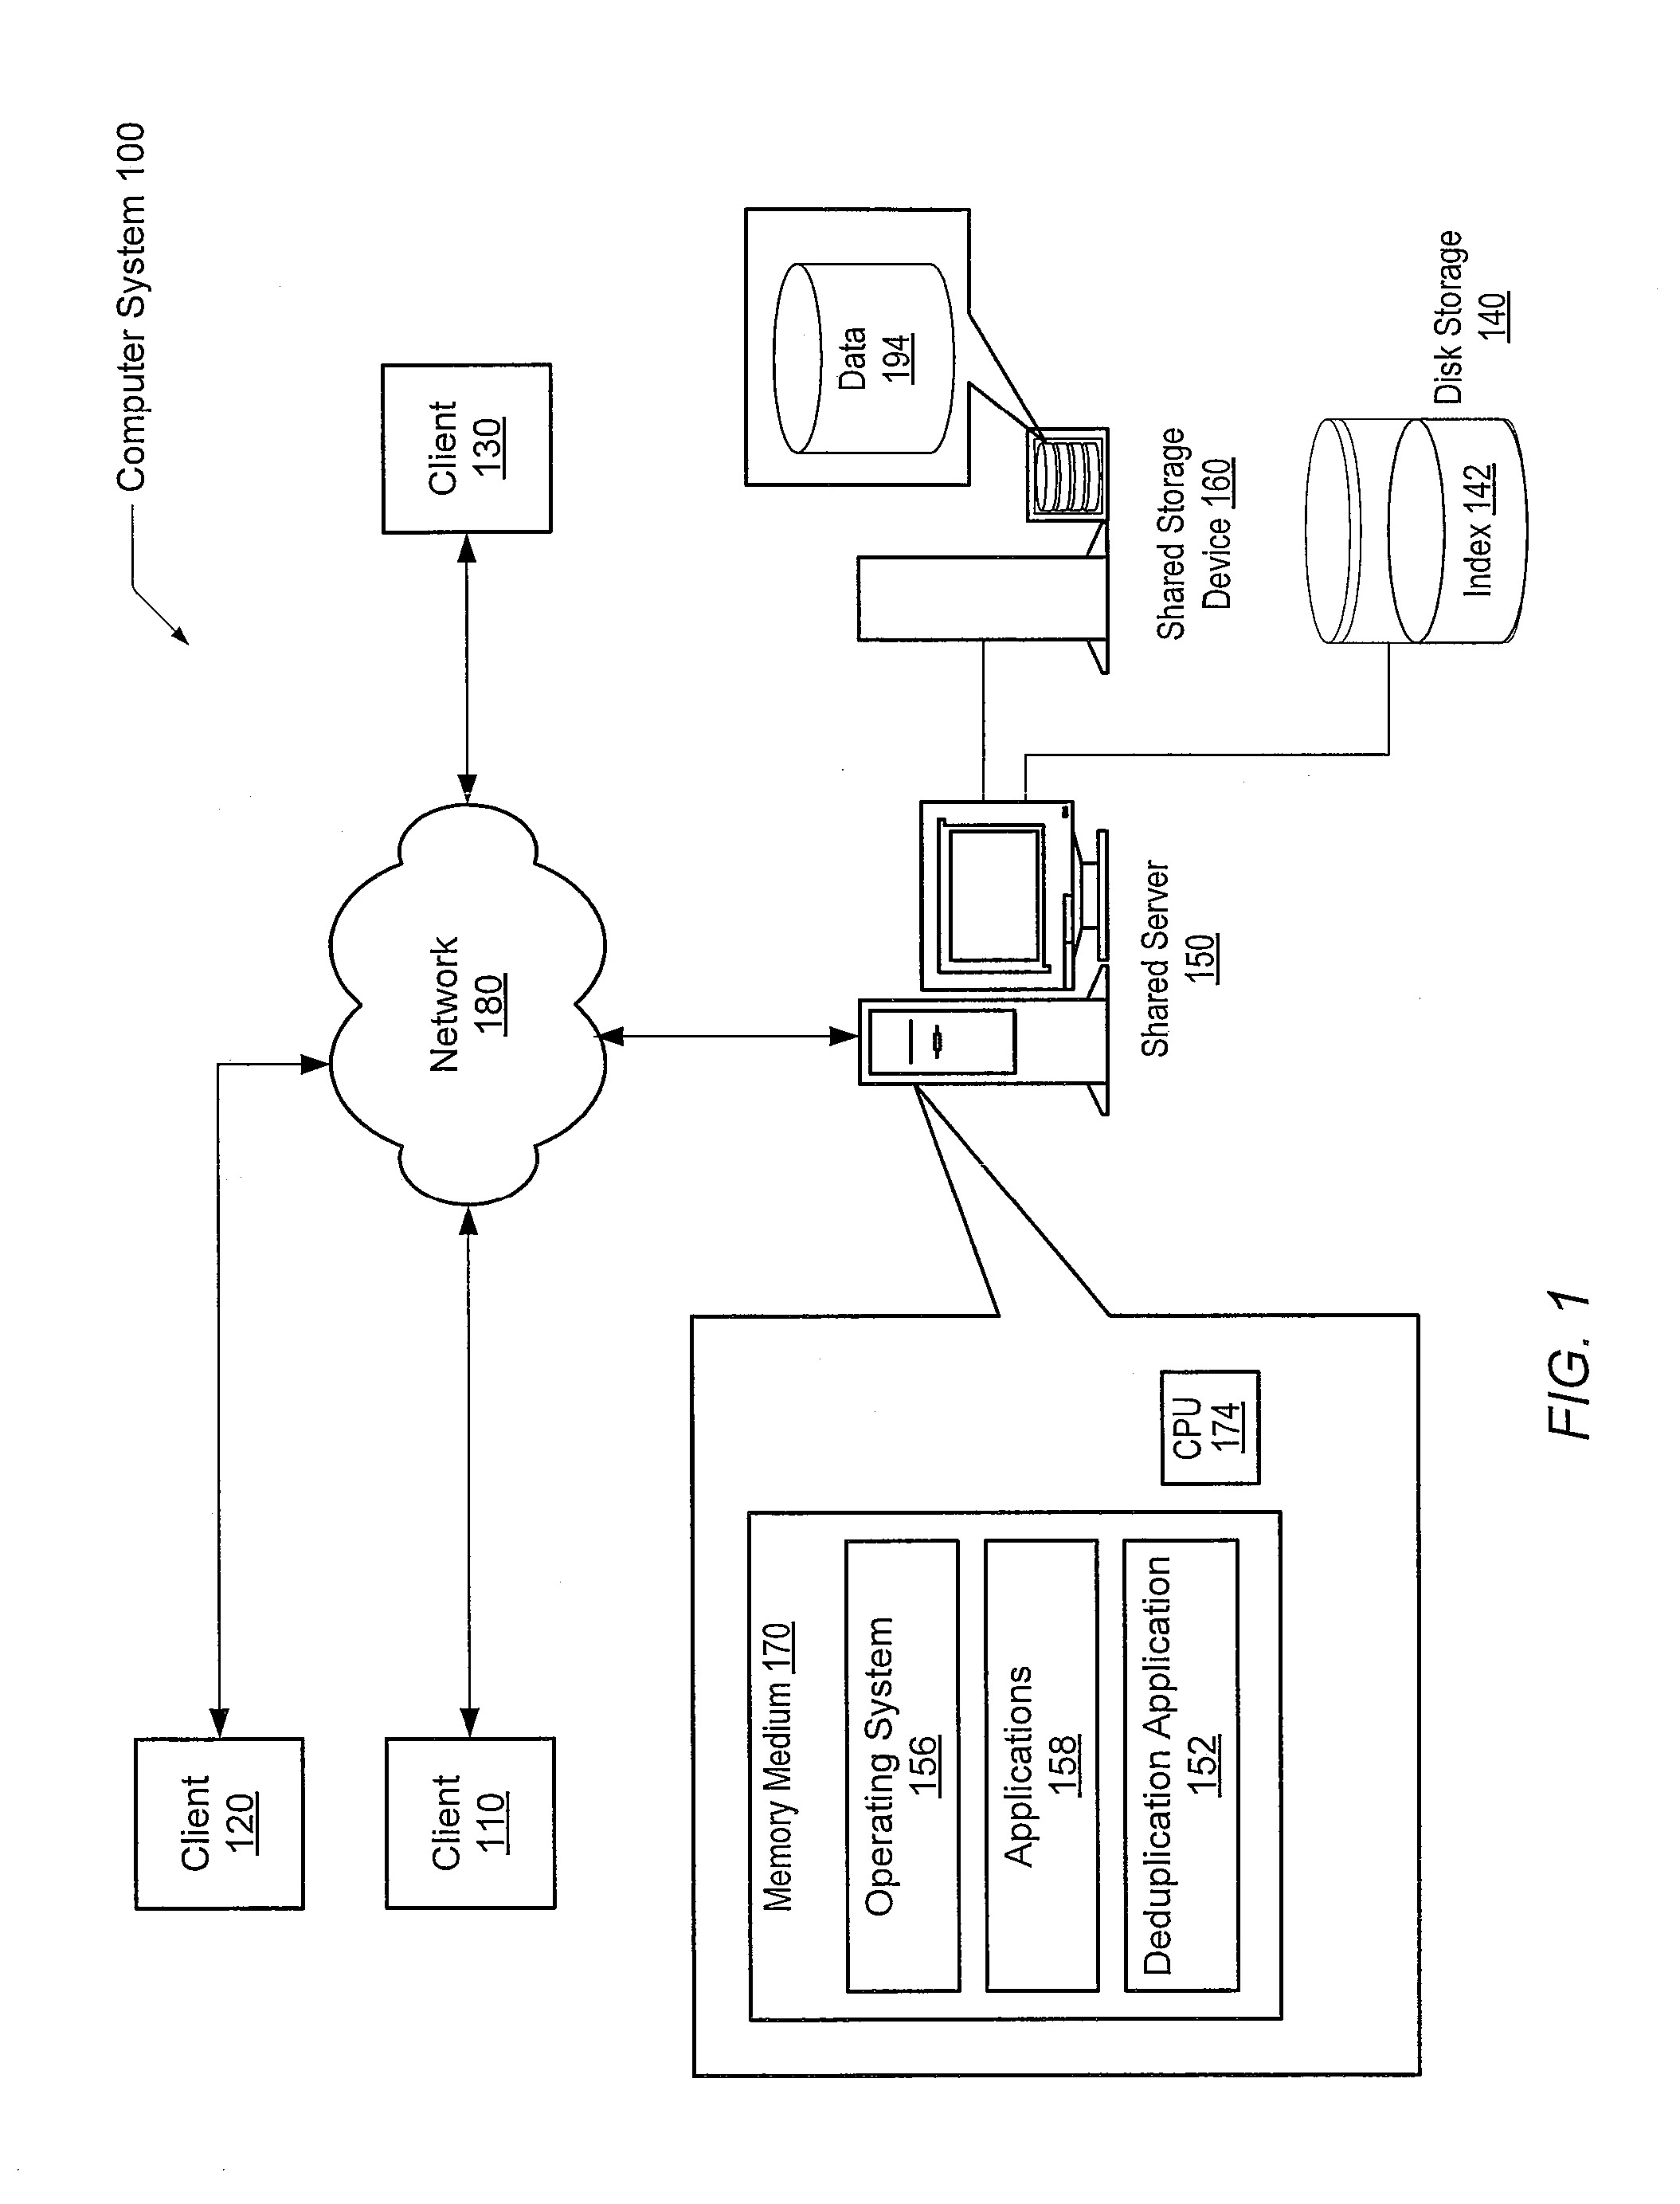 System and method for high performance deduplication indexing